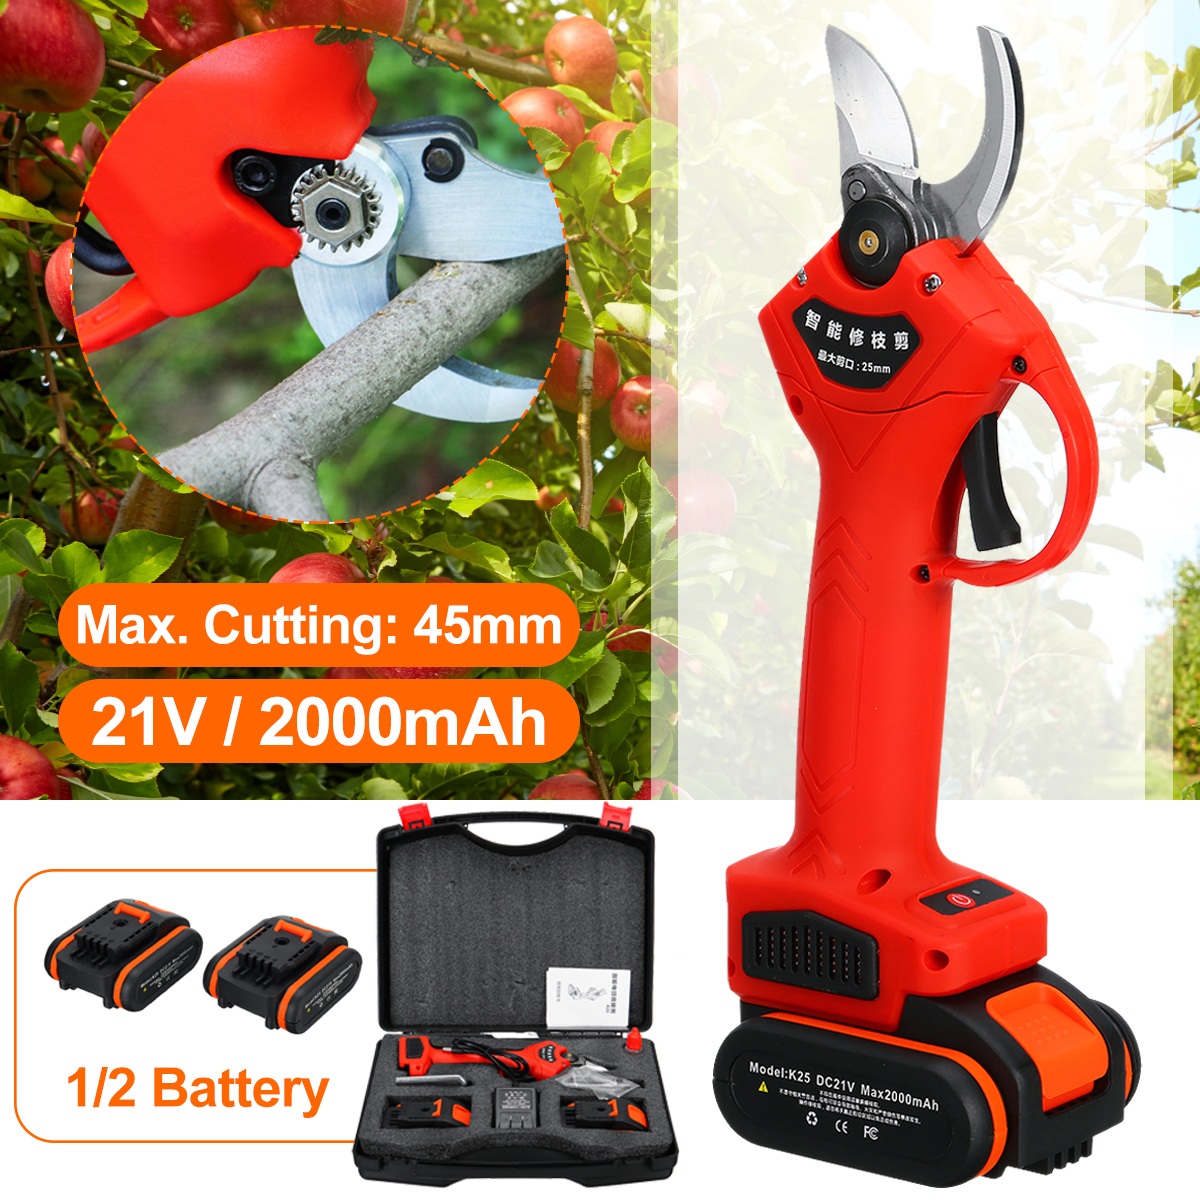 21V-Cordless-Electric-Pruning-Shears-Garden-Pruner-Branch-Cutting-Tool-With-12-Battery-1776780-1